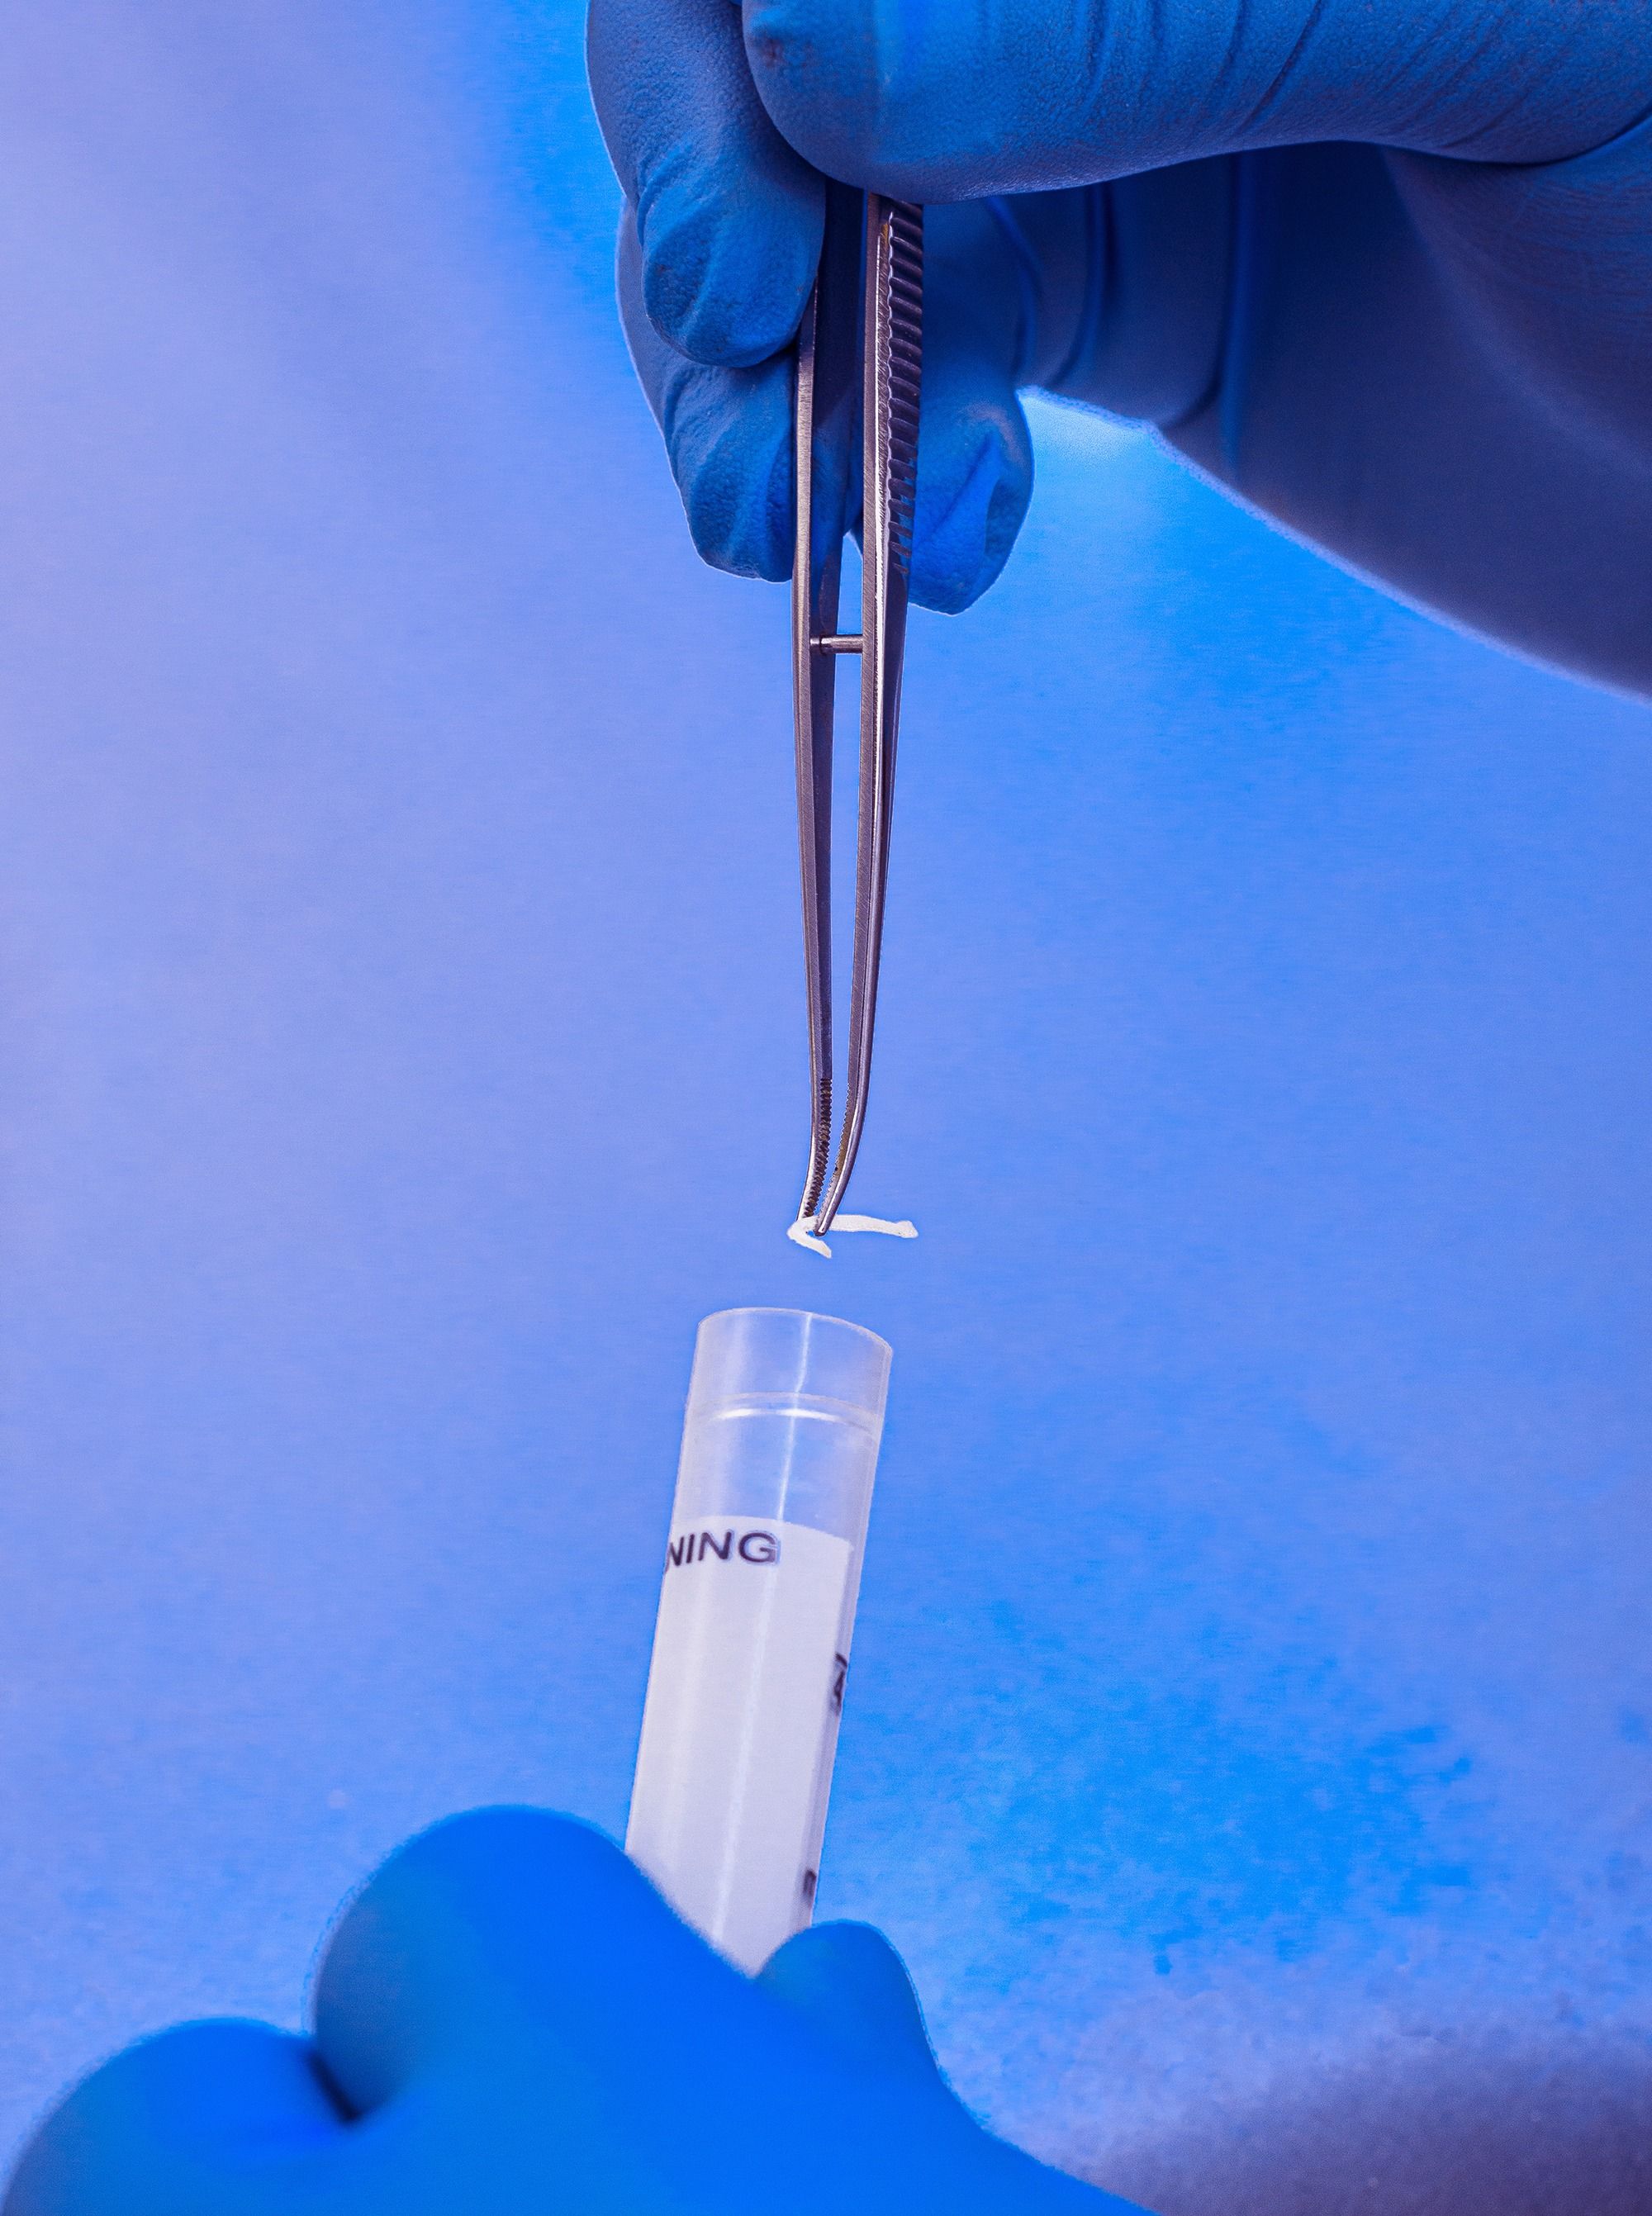 Researcher placing white particulate into a test tube